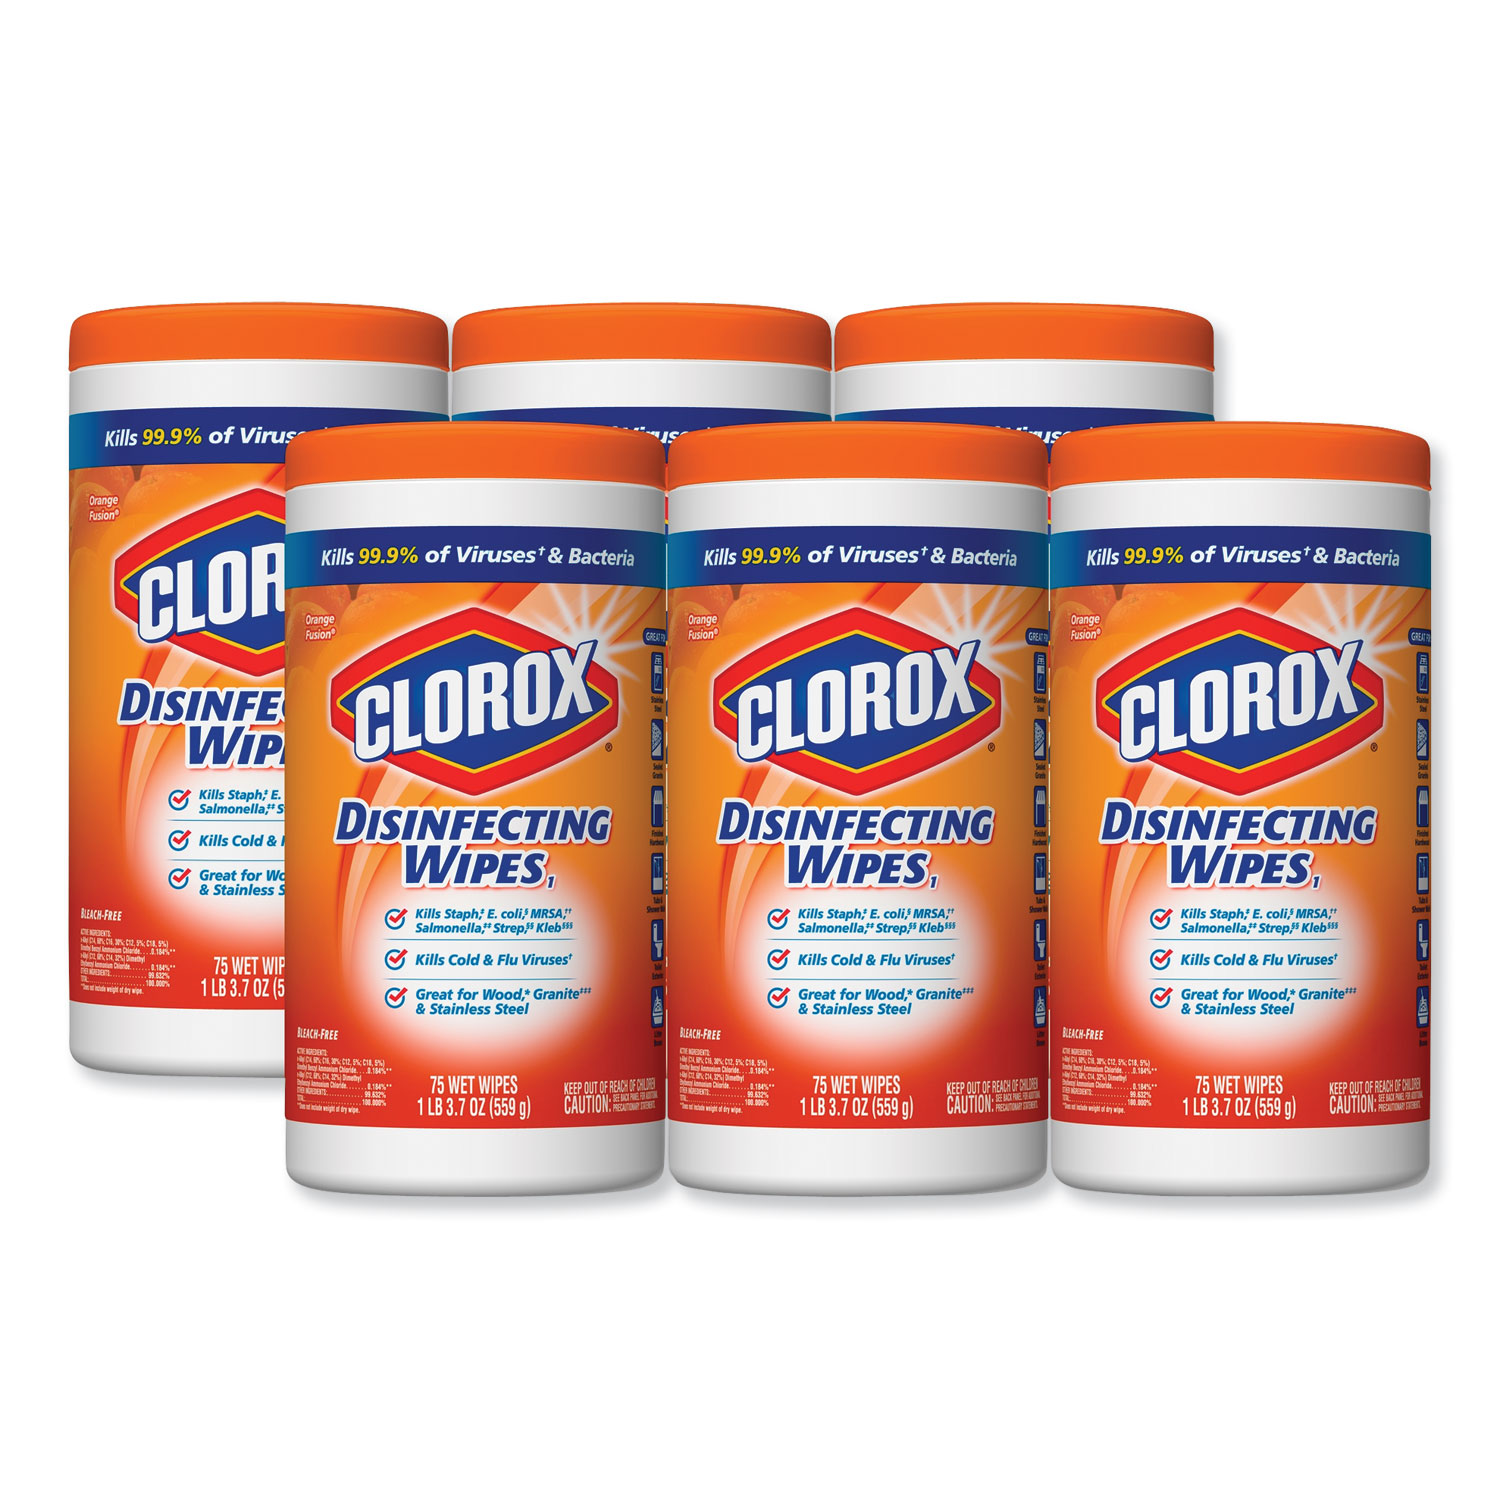  Clorox CLO 01686 Disinfecting Wipes, 7 x 8, Orange Fusion, 75/Canister, 6 Canisters/Carton (CLO01686CT) 